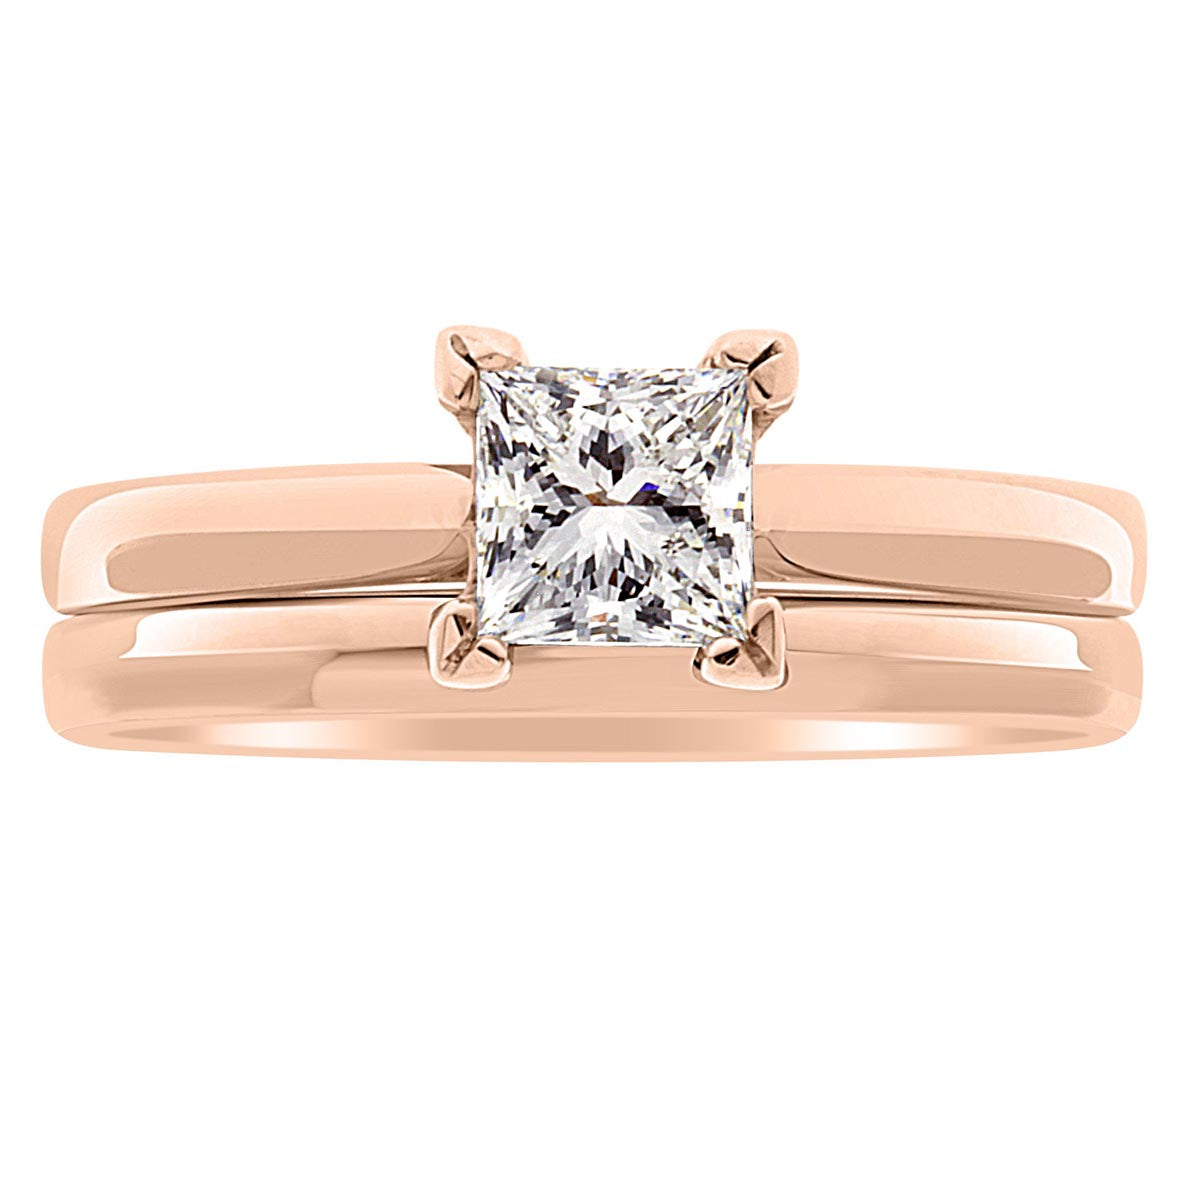 Princess Cut Solitaire engagement ring made from rose gold pictured with a plain wedding ring